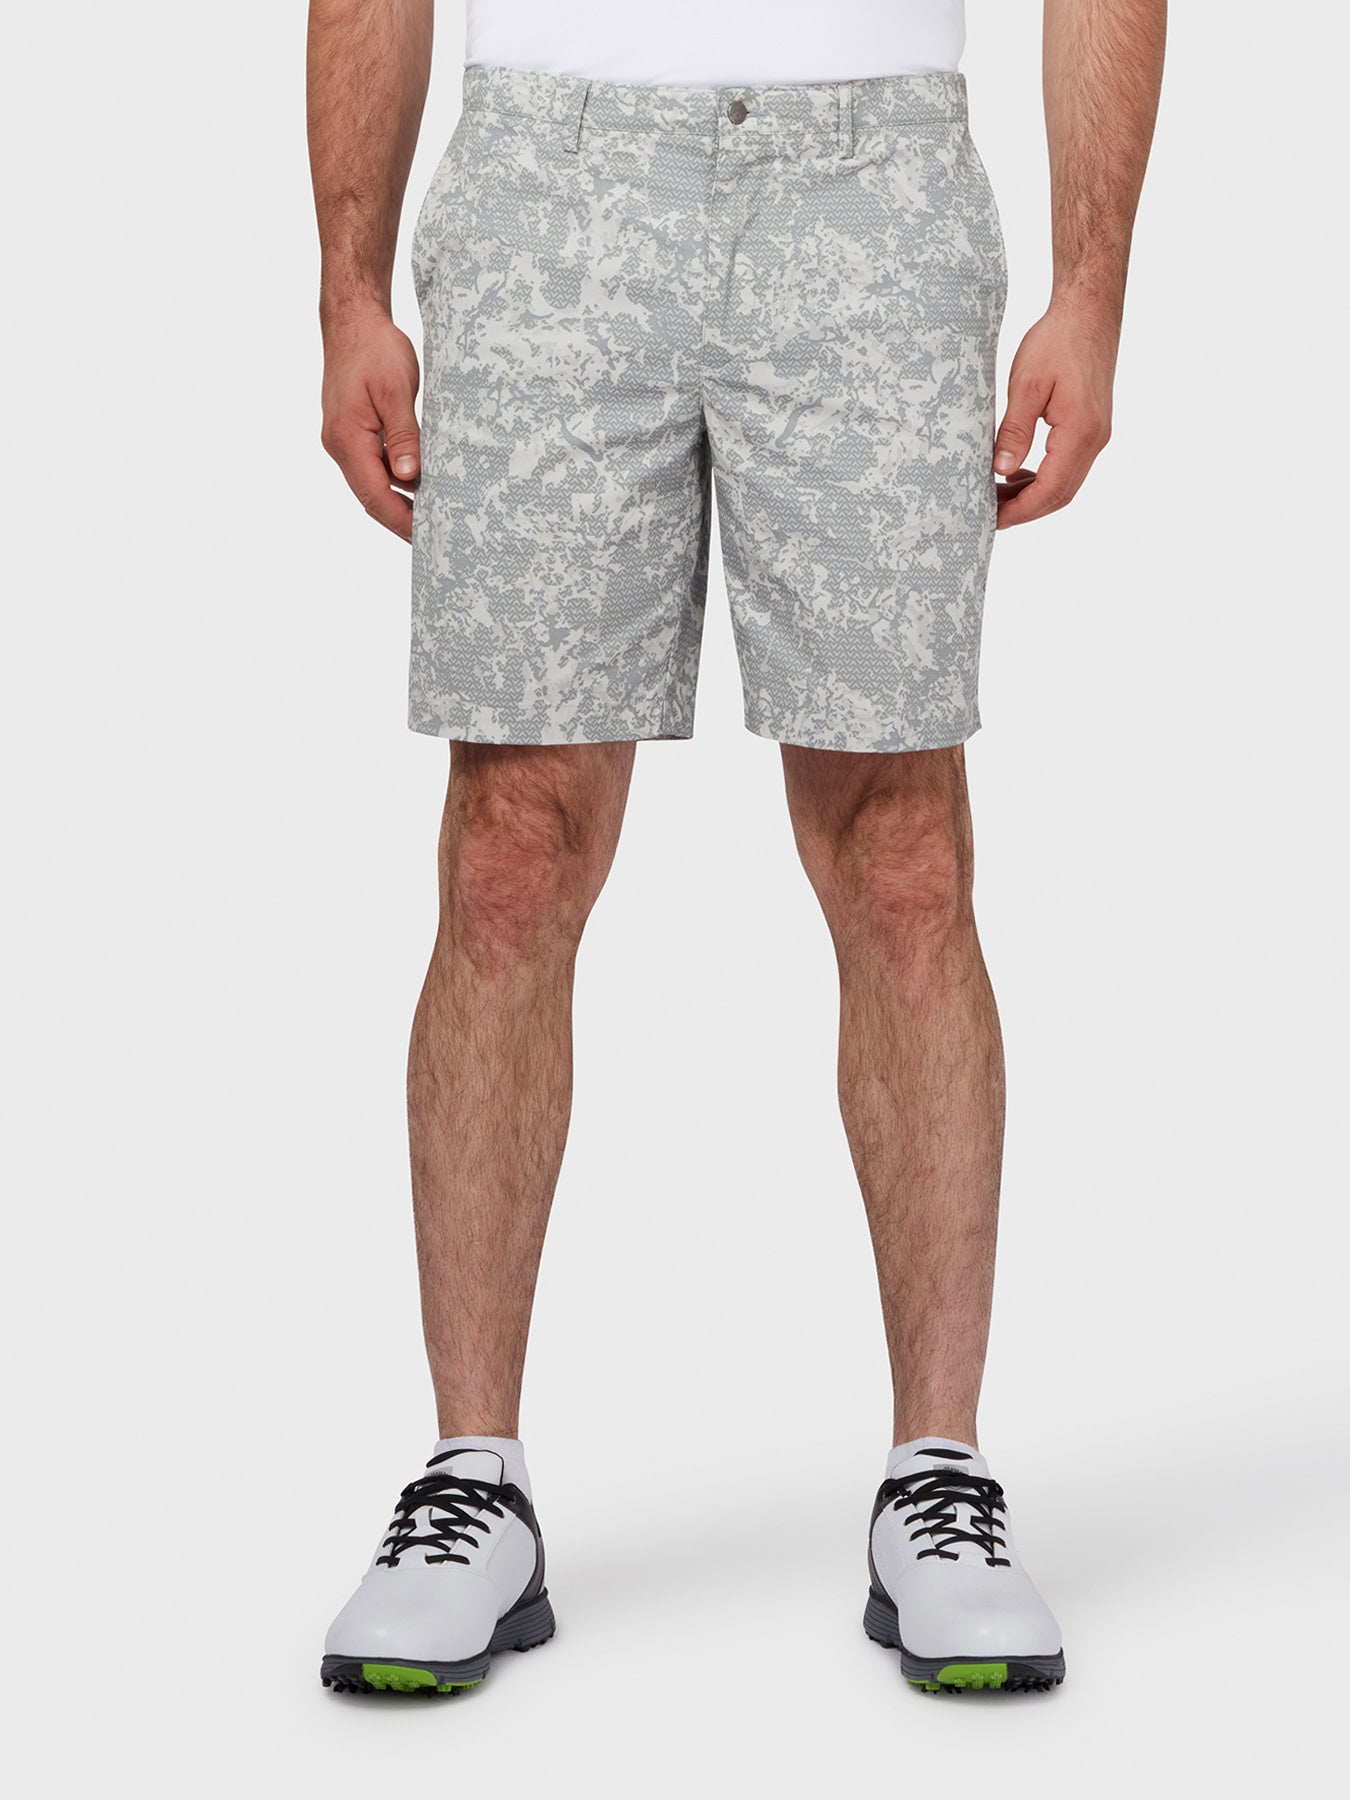 View X Series Abstract Camo Shorts In Quarry Grey Quarry 34 information